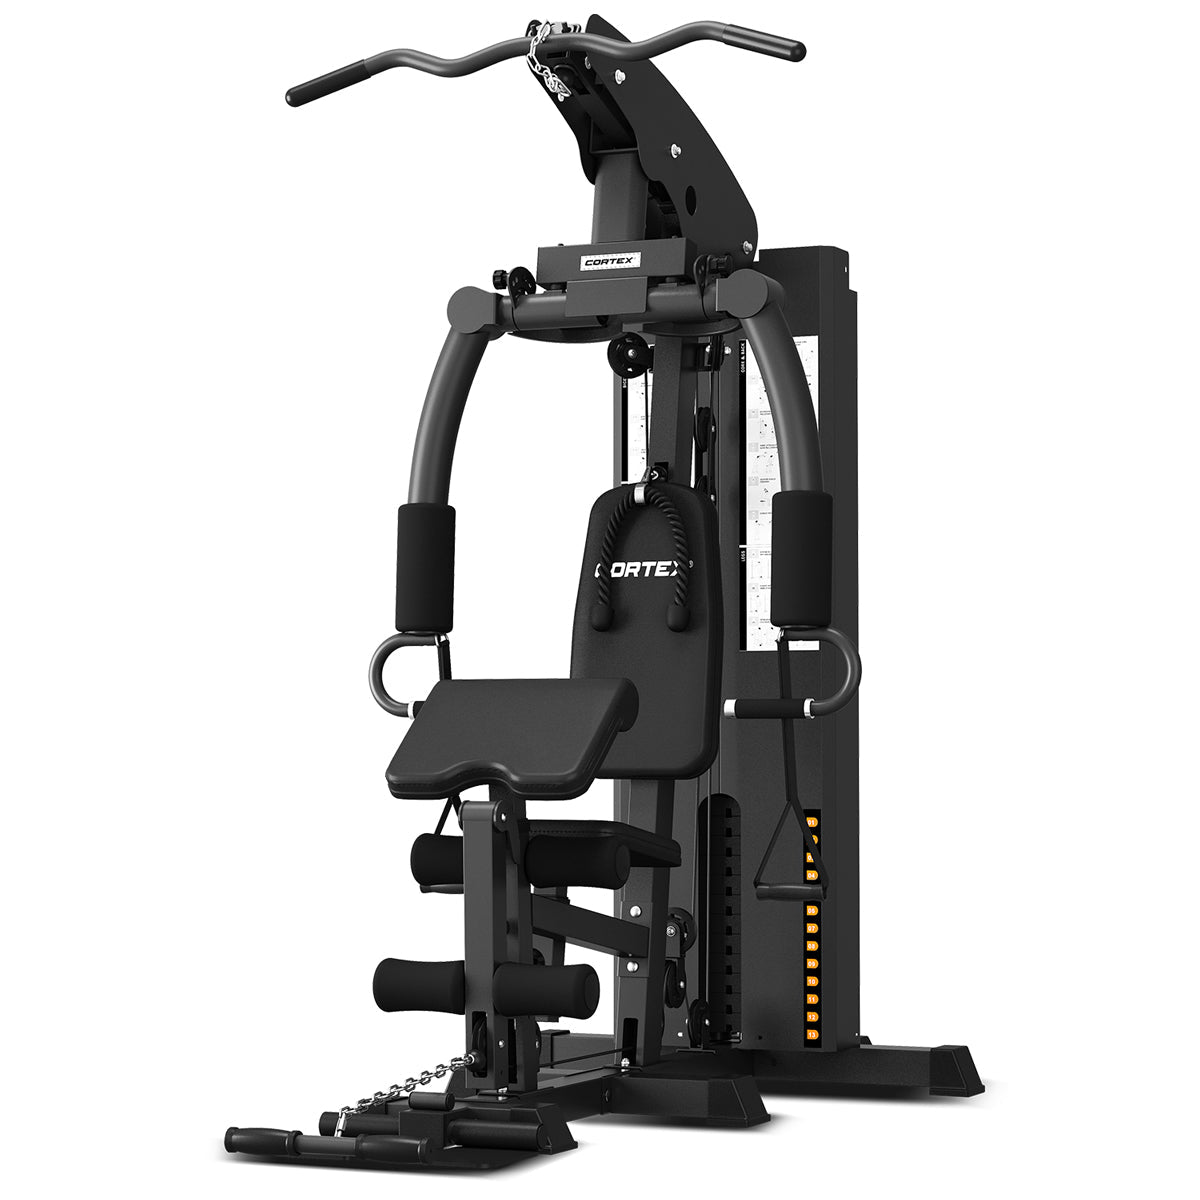 CORTEX SS3 Multi-Function Home Gym with 98kg Weight Stack